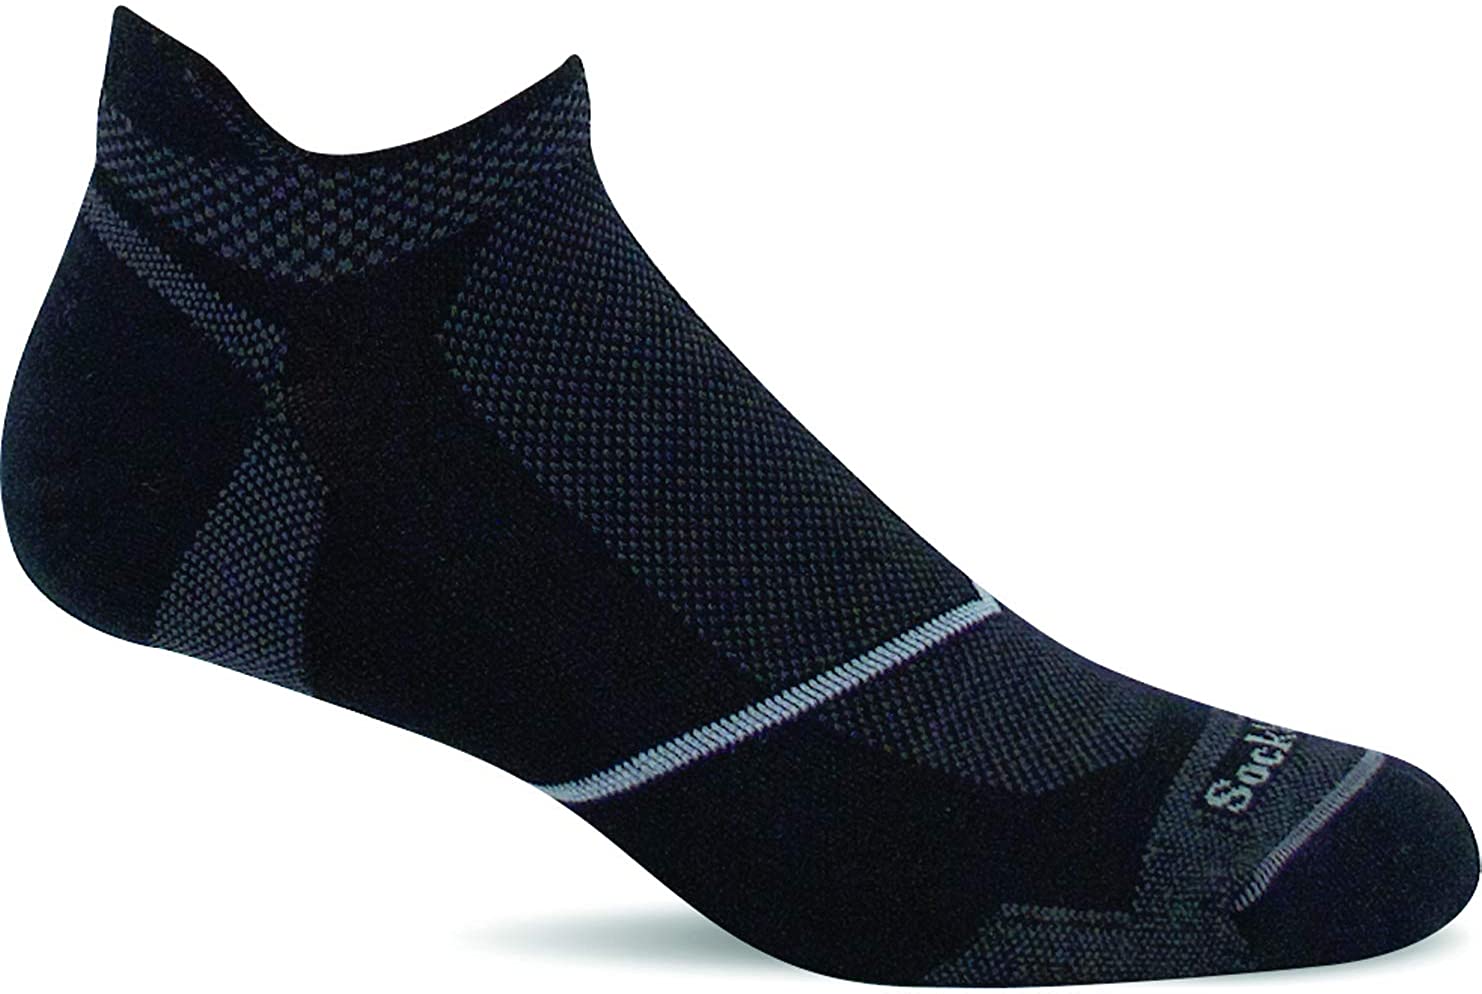 Men's Sockwell Pulse Micro Firm Compression Sock in Black